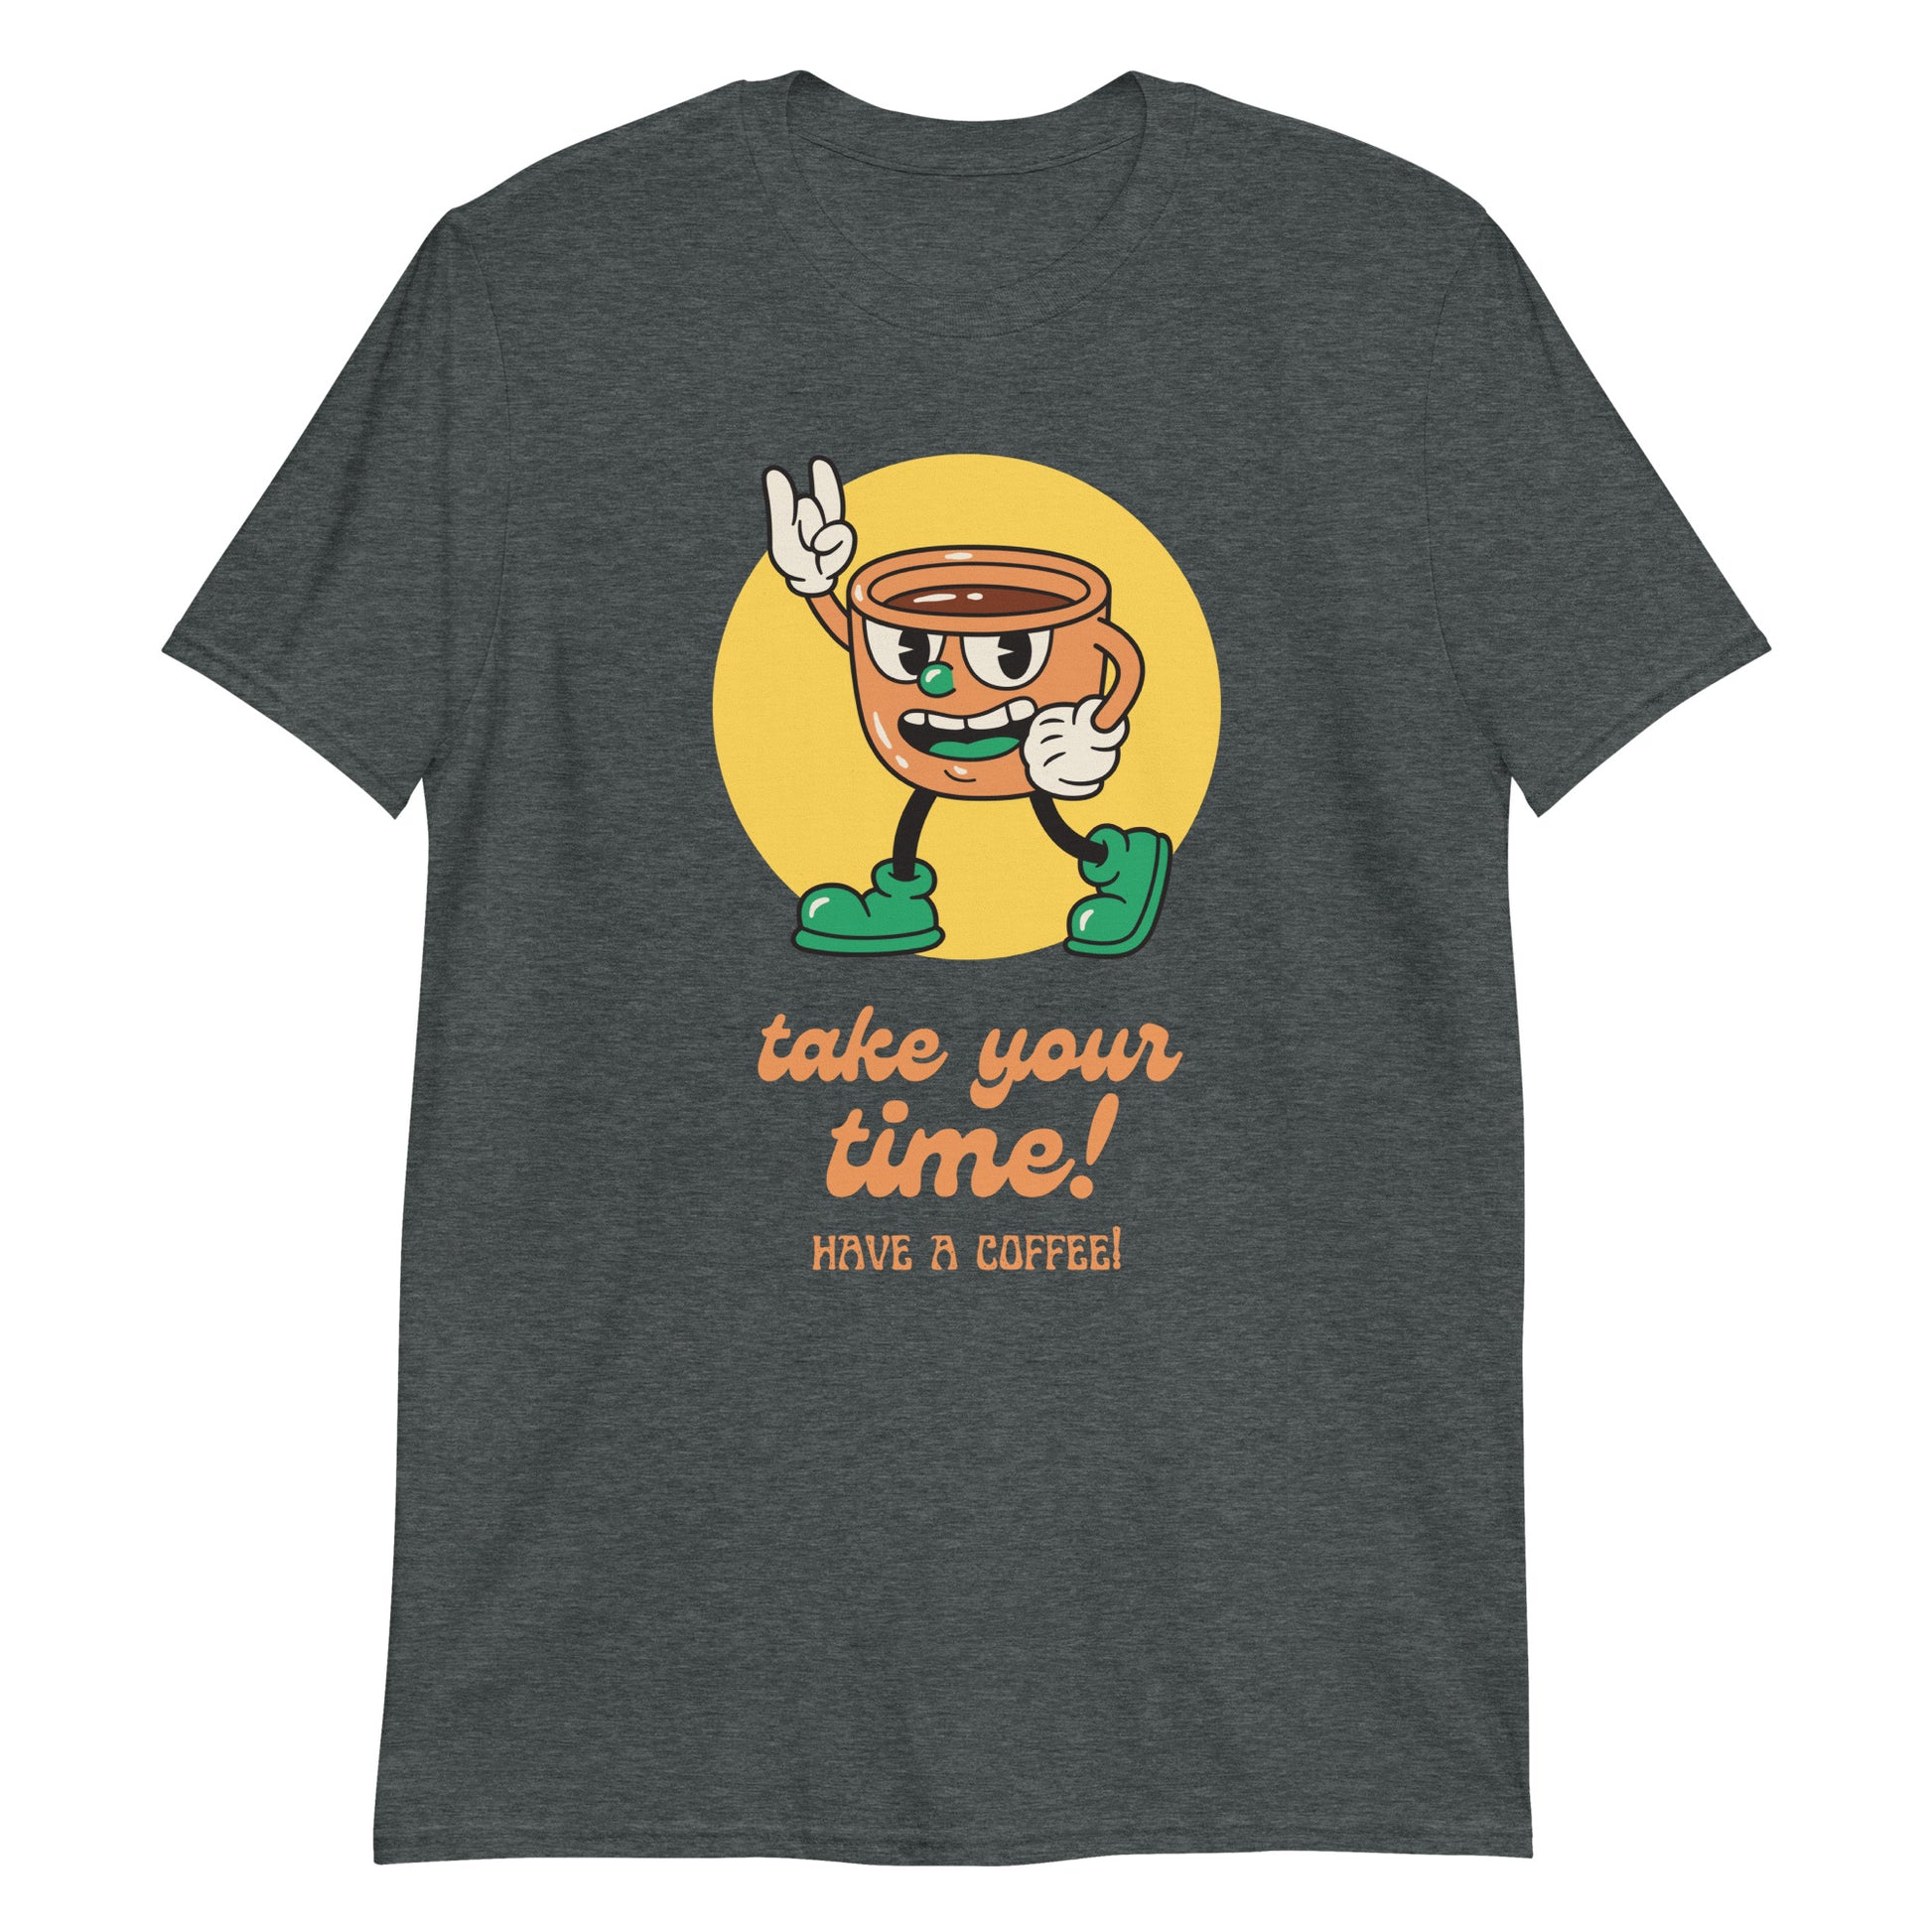 Take Your Time, Have A Coffee - Short-Sleeve Unisex T-Shirt Dark Heather Unisex T-shirt Coffee Retro